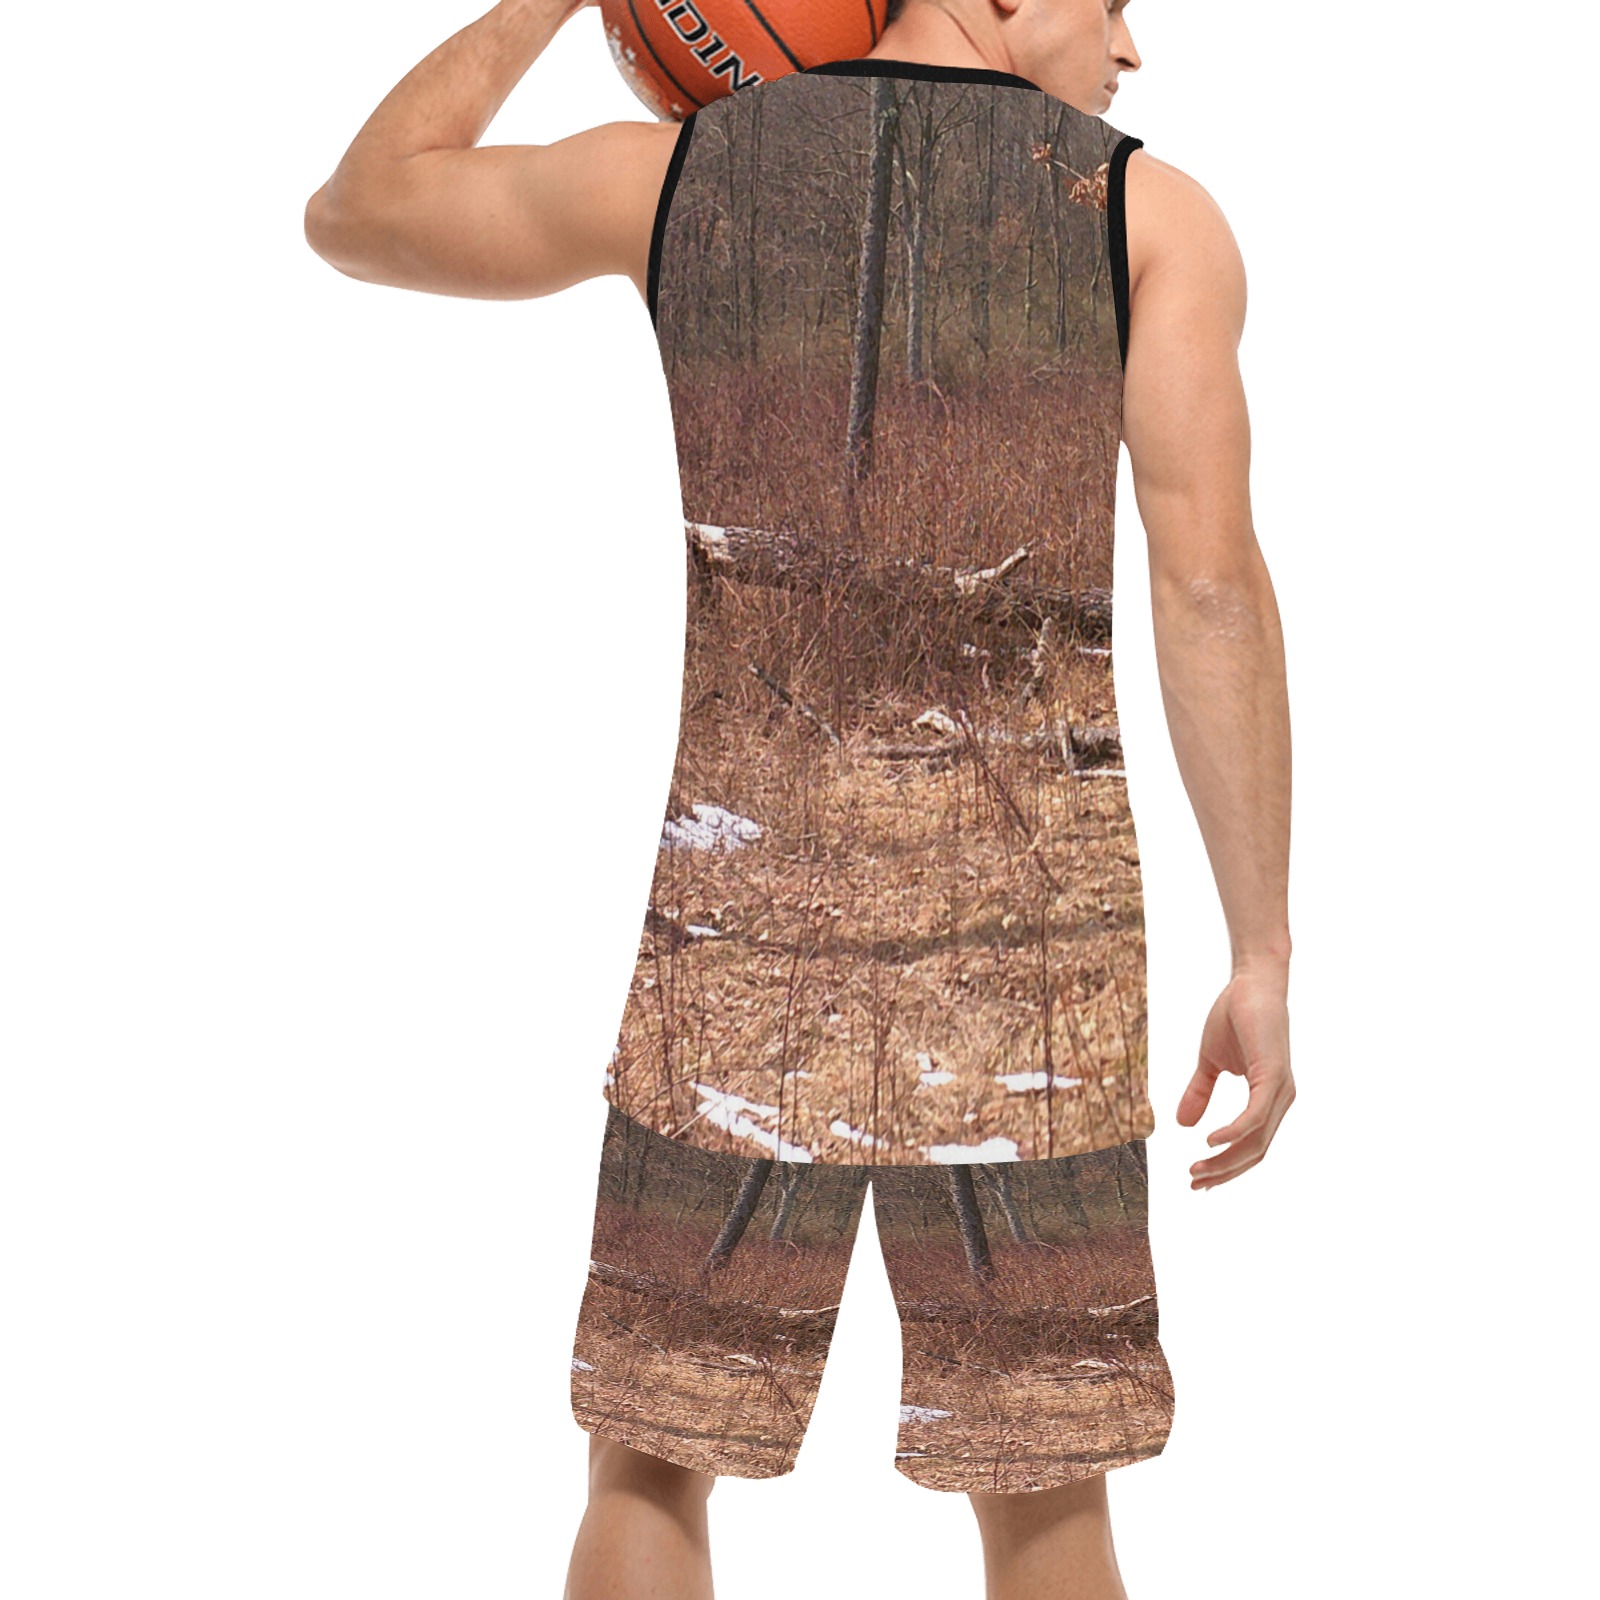 Falling tree in the woods Basketball Uniform with Pocket